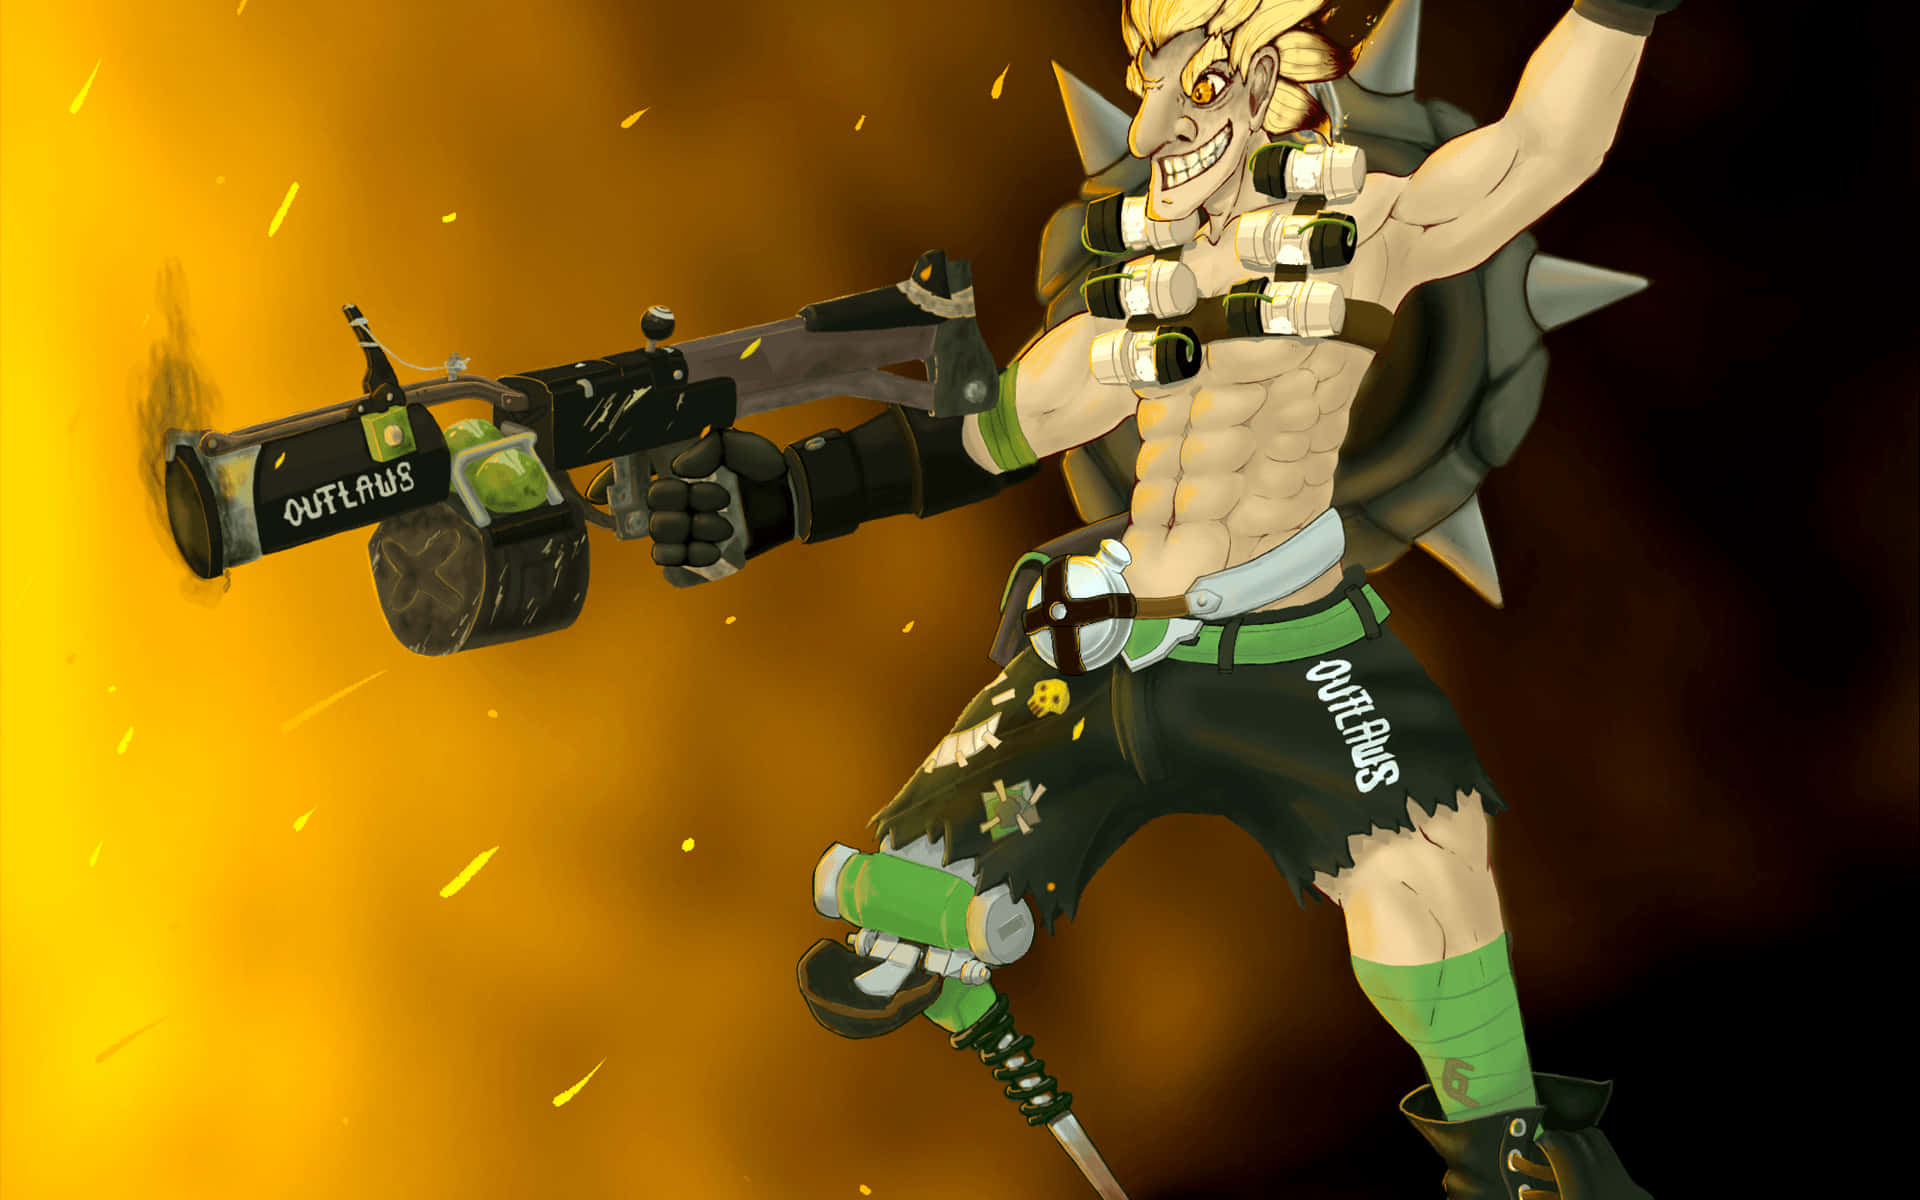 "The High-flying Junkrat Ready for Adventure" Wallpaper